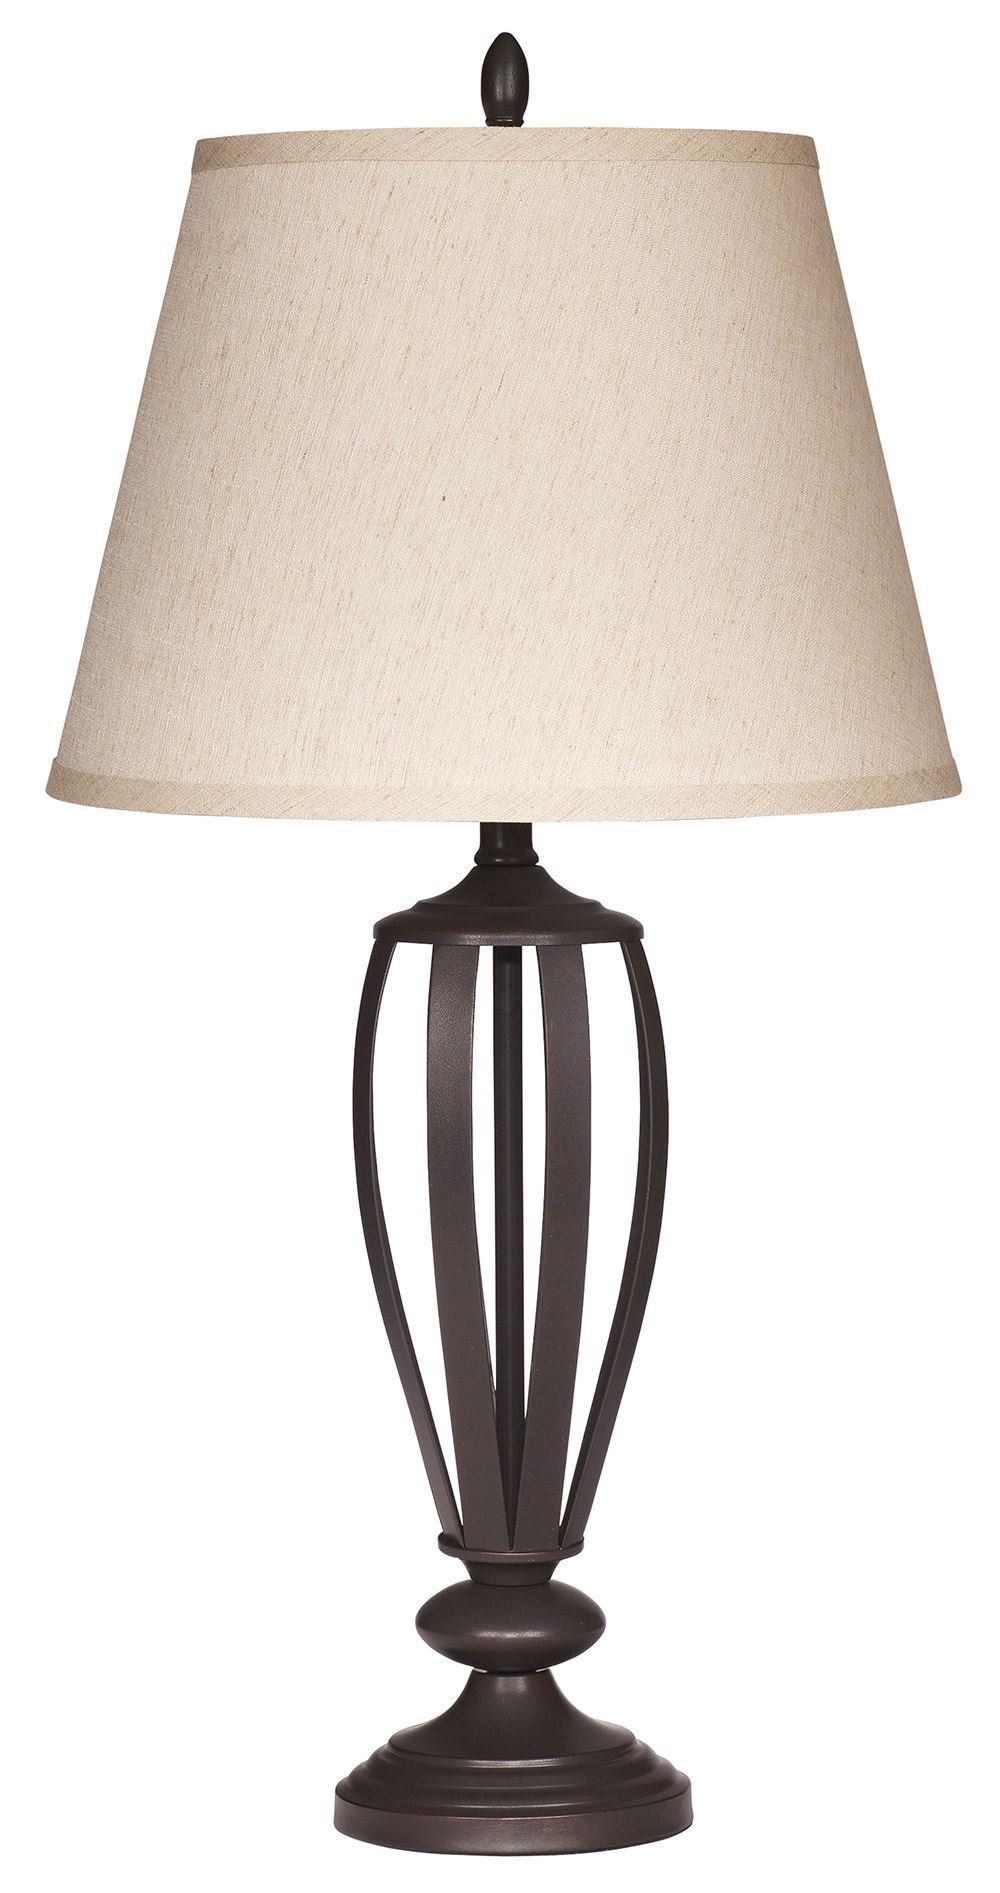 Mildred Table Lamp